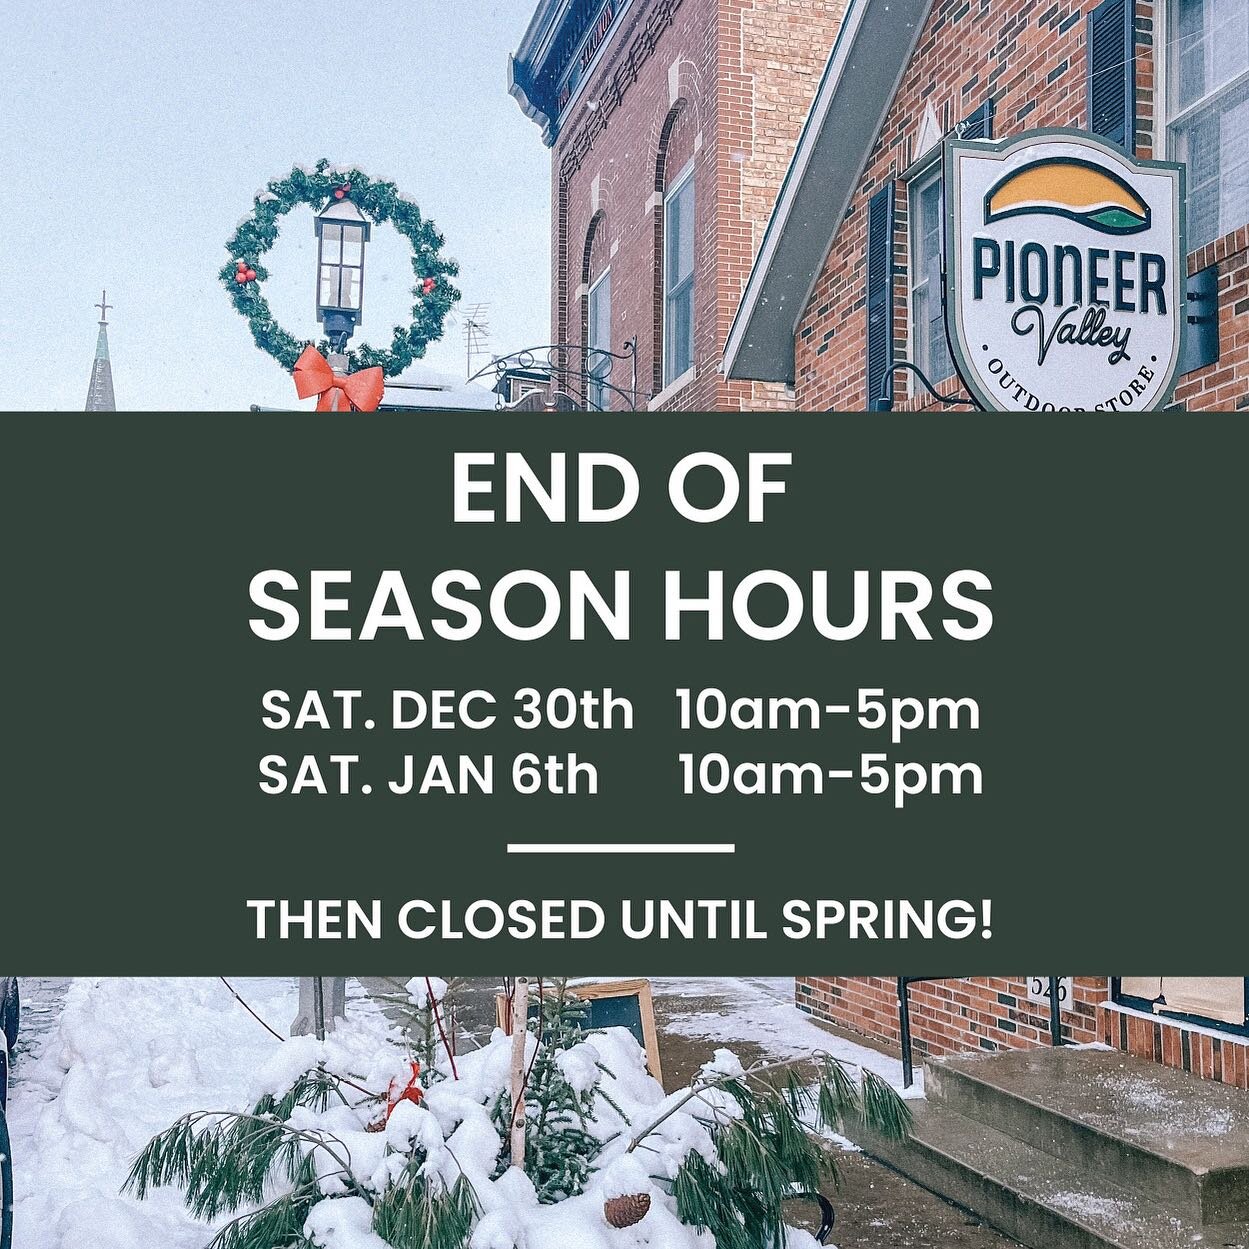 We have a couple more Saturdays before we close up until spring 2024. You can always call or email if you need something by appointment. We have some exciting new products planned for for the spring so stay tuned!